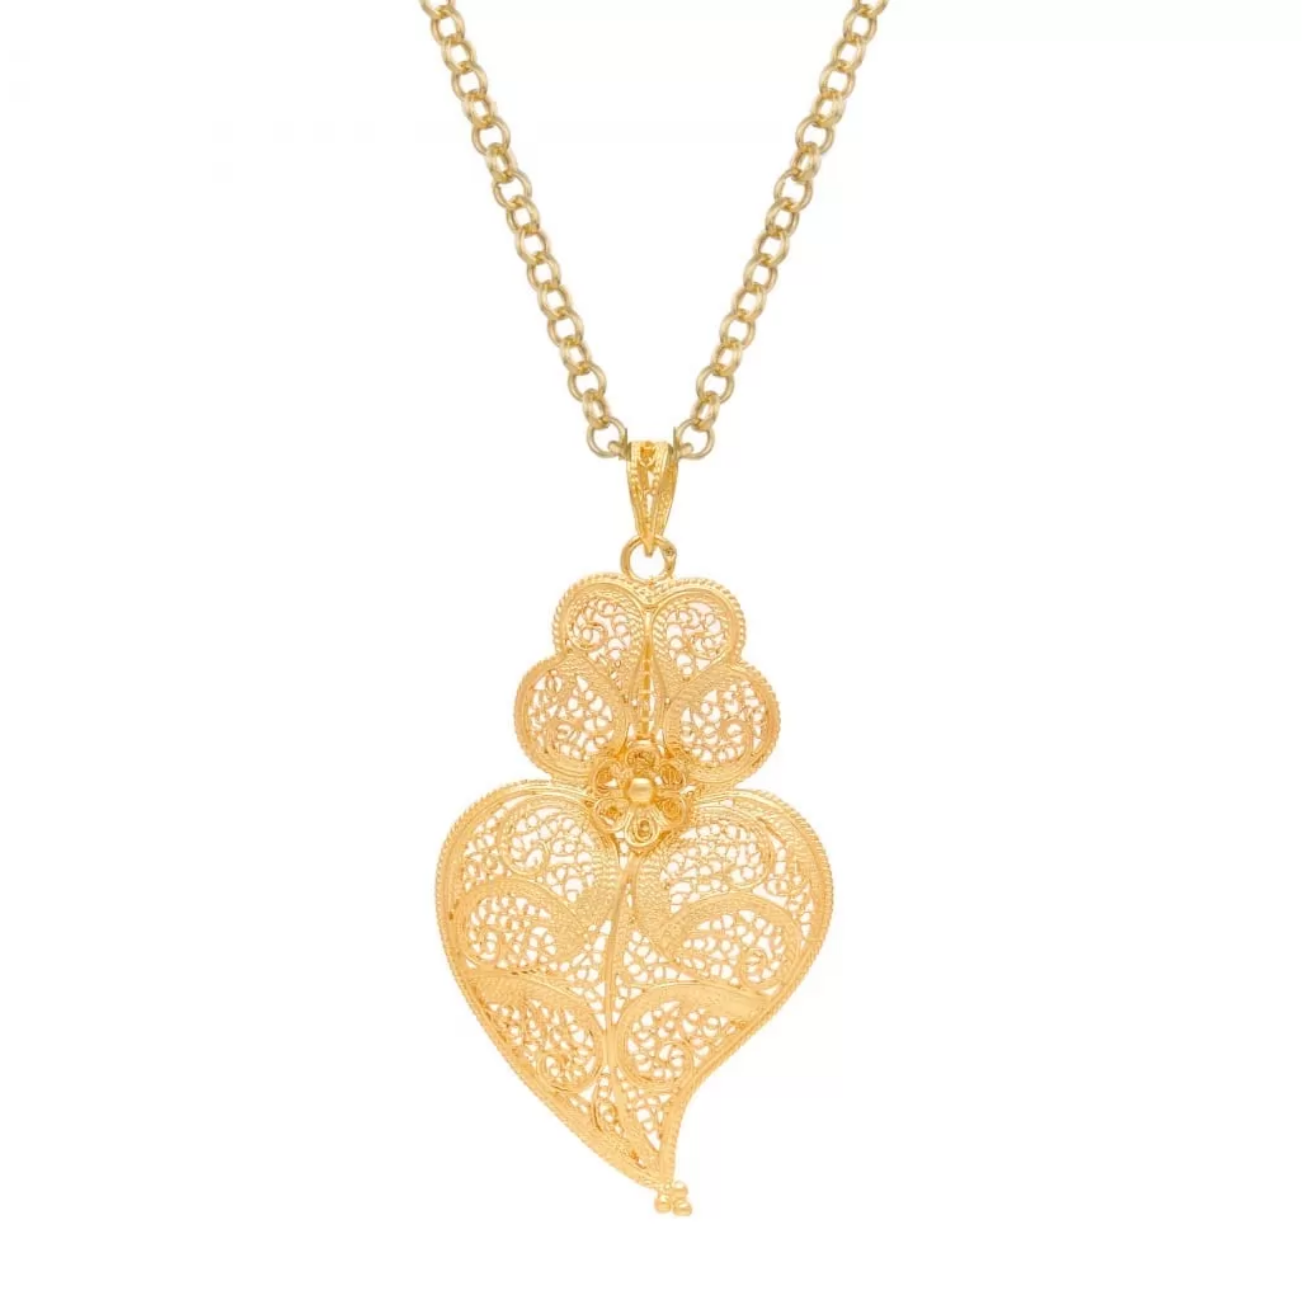 Necklace Heart of Viana - M